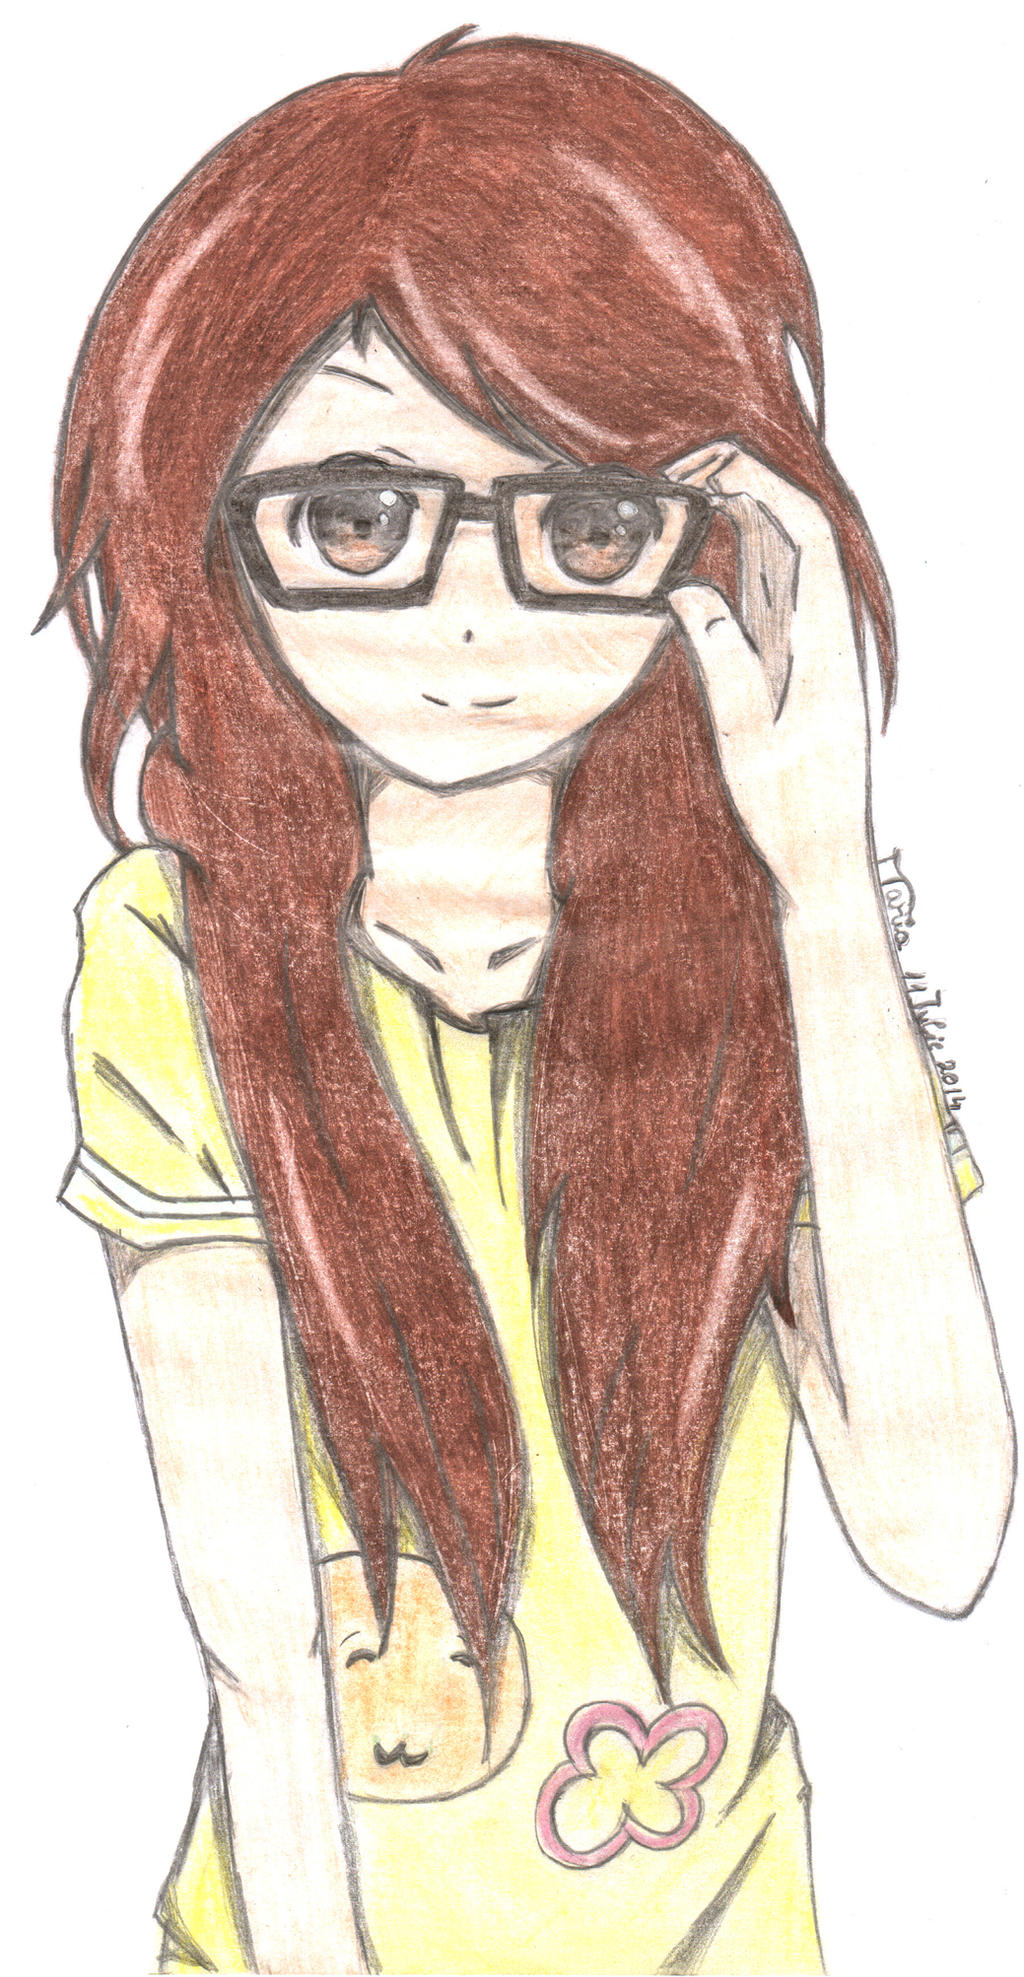 Cute Anime Girl with Glasses by Sasaki-chan2000 on DeviantArt